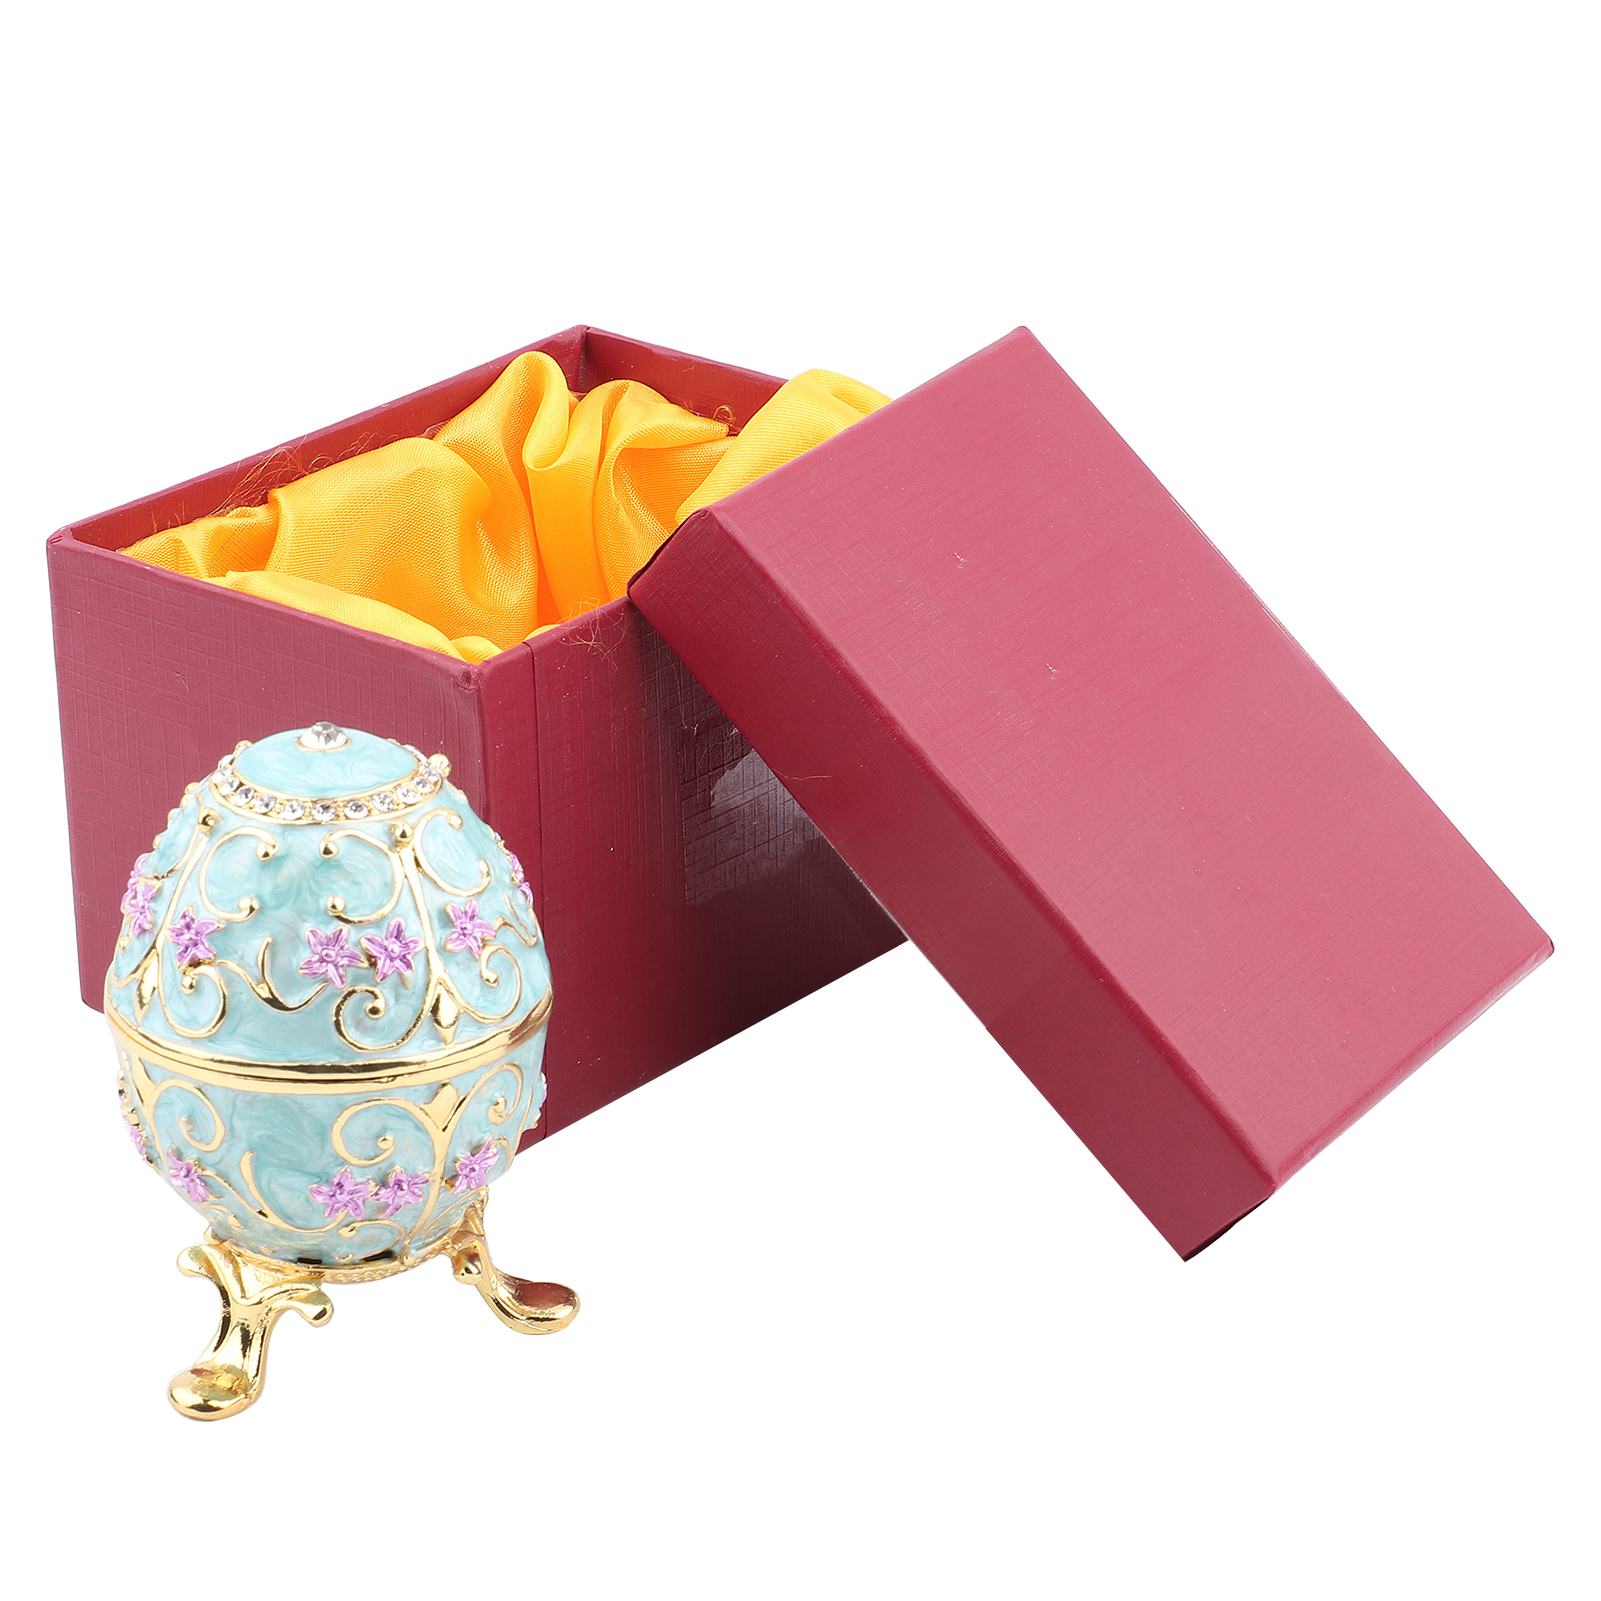 Faberge Egg, Decorative Hand-made Enameled Easter Egg Box, Metal For Women Home Ornaments Desktop Decor Gifts - image 3 of 8